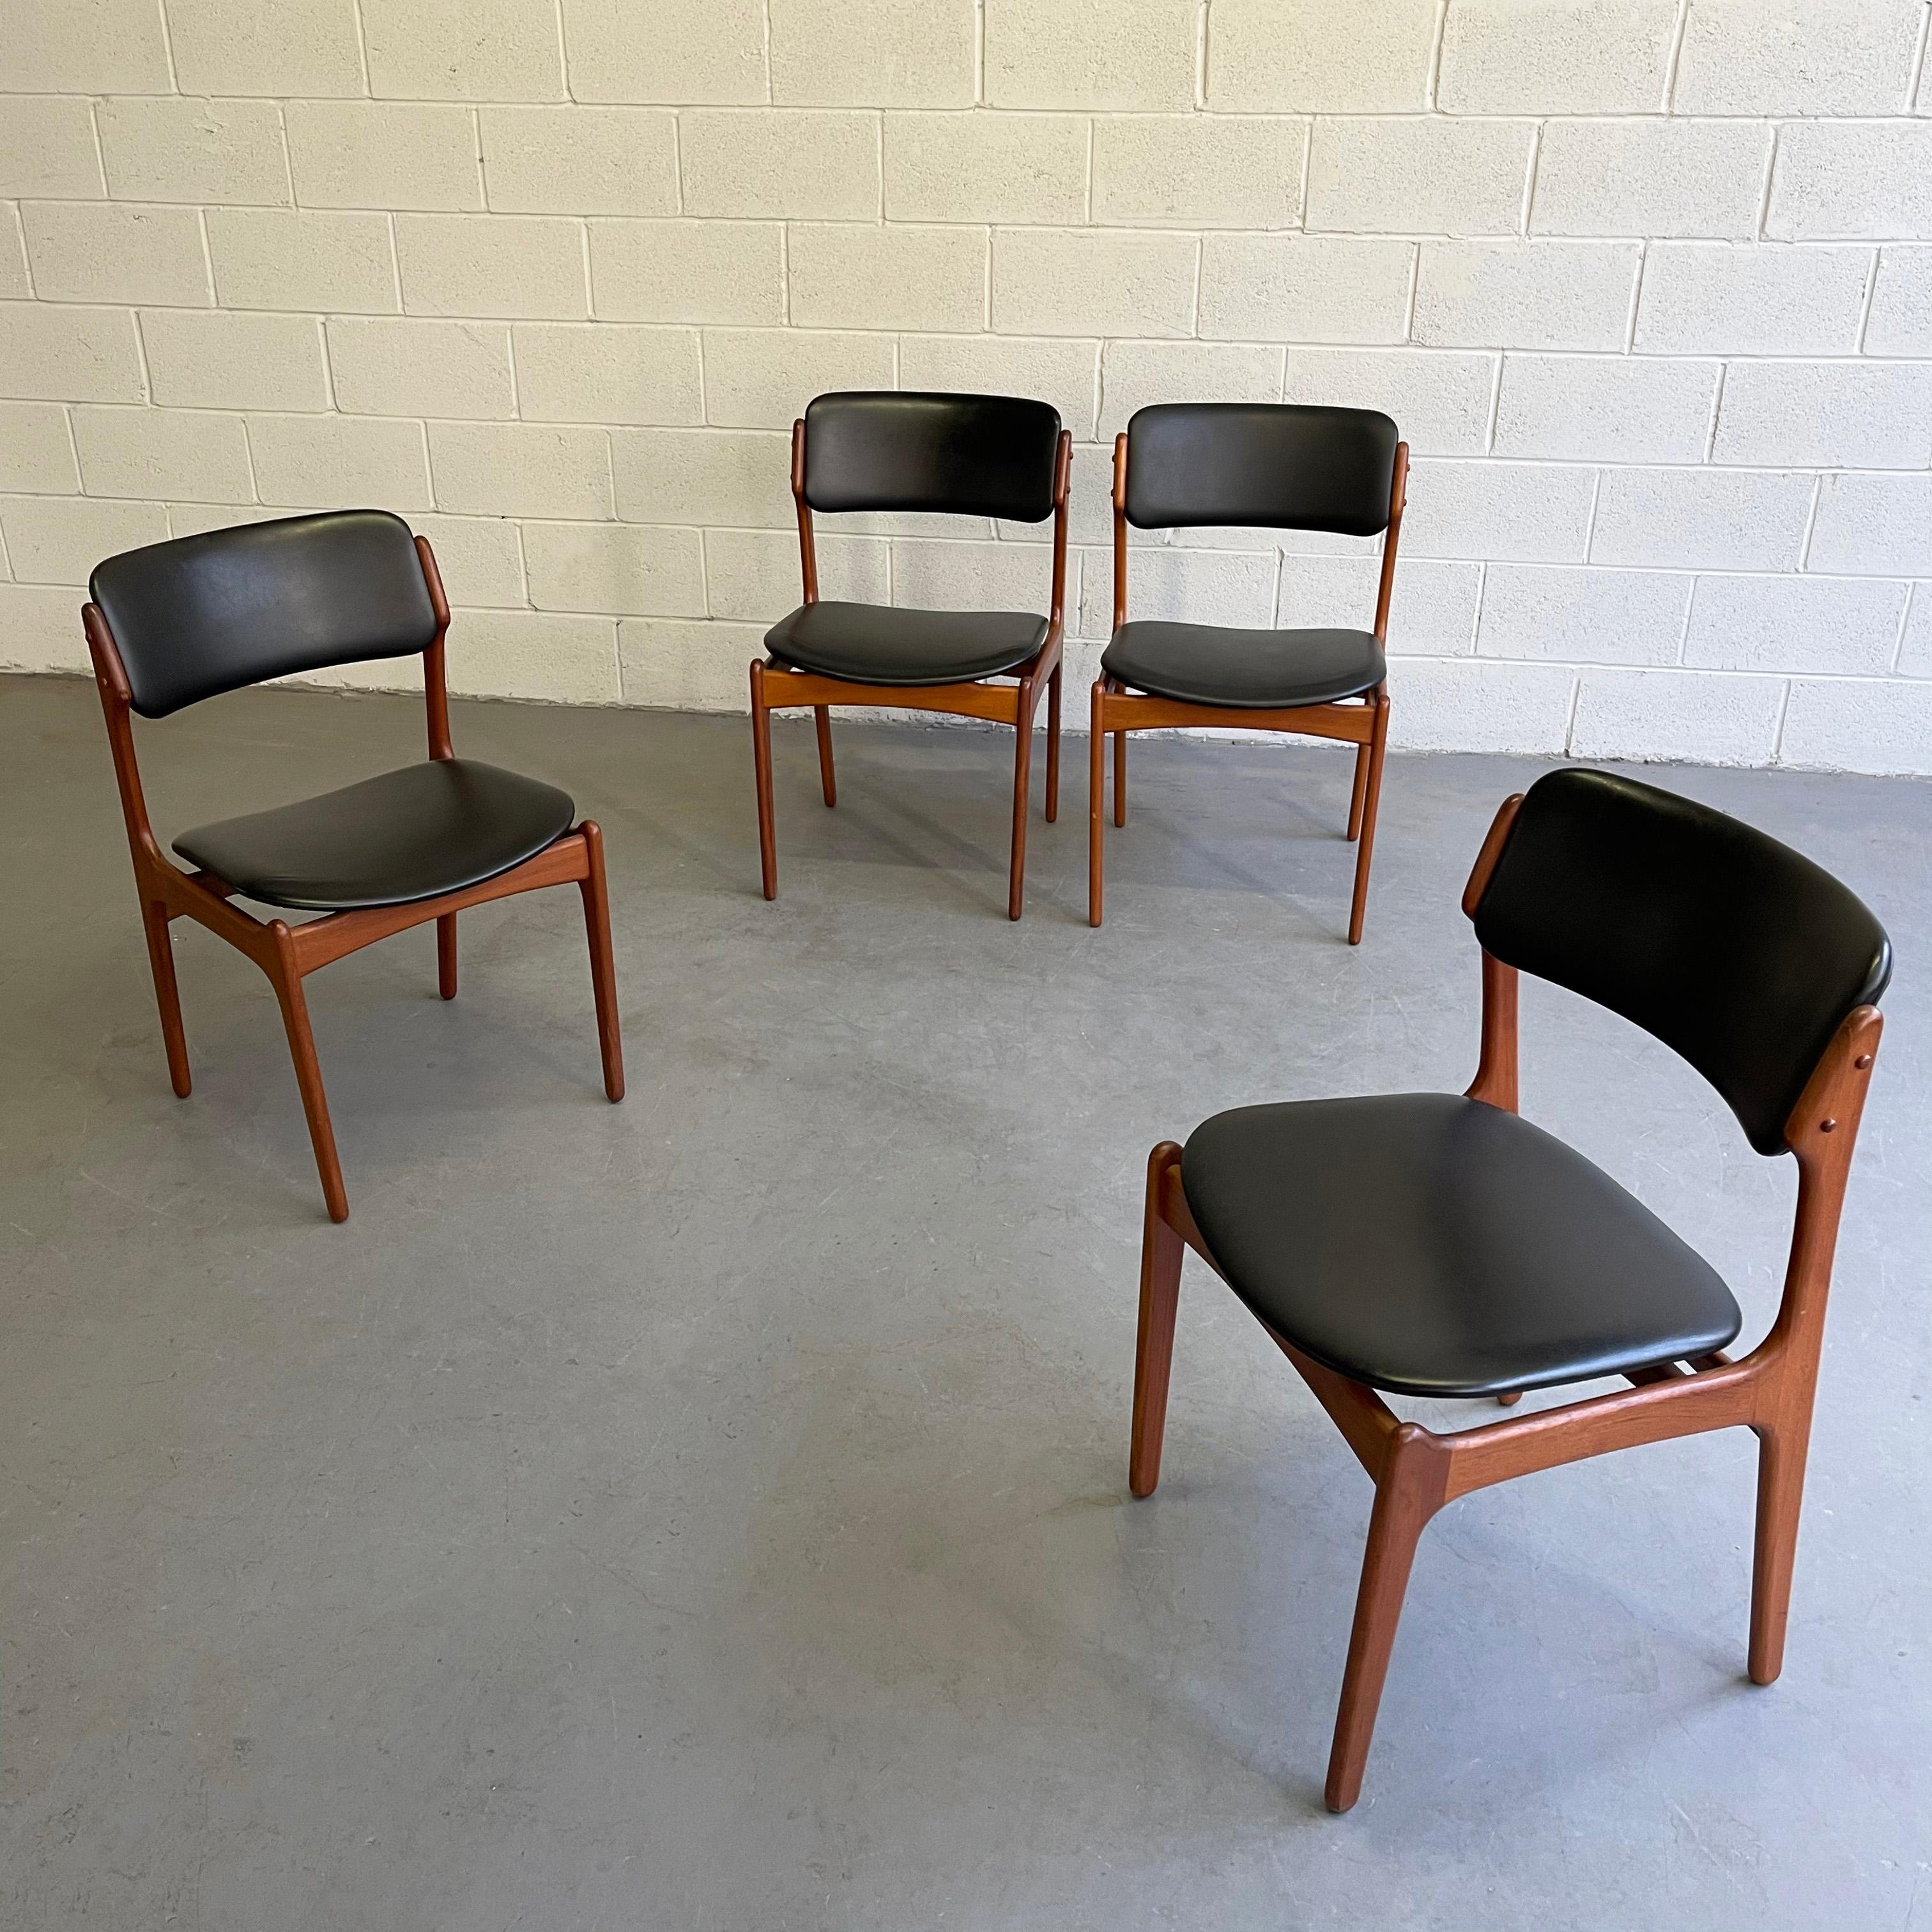 Set of 4 Danish modern, teak, model 49, dining chairs by Erik Buch for Odense Maskinsnedkeri, distributed by Maurice Villency with black textured leather upholstery. A 5th chair is available, sold separately.